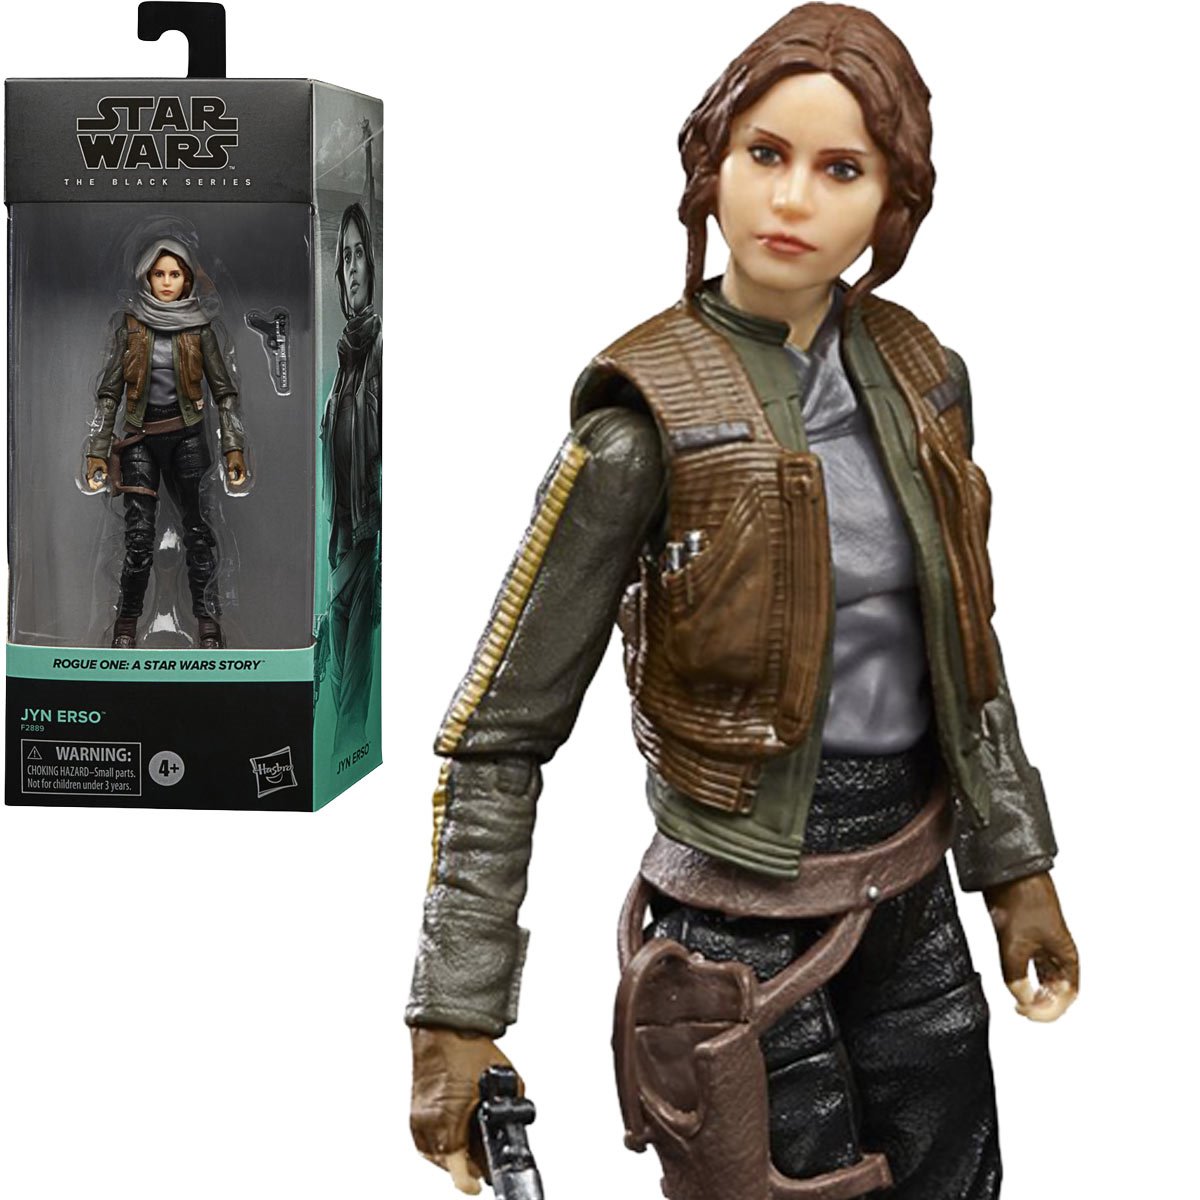 Star Wars The Vintage Collection Jyn Erso 3.75-inch Figure 